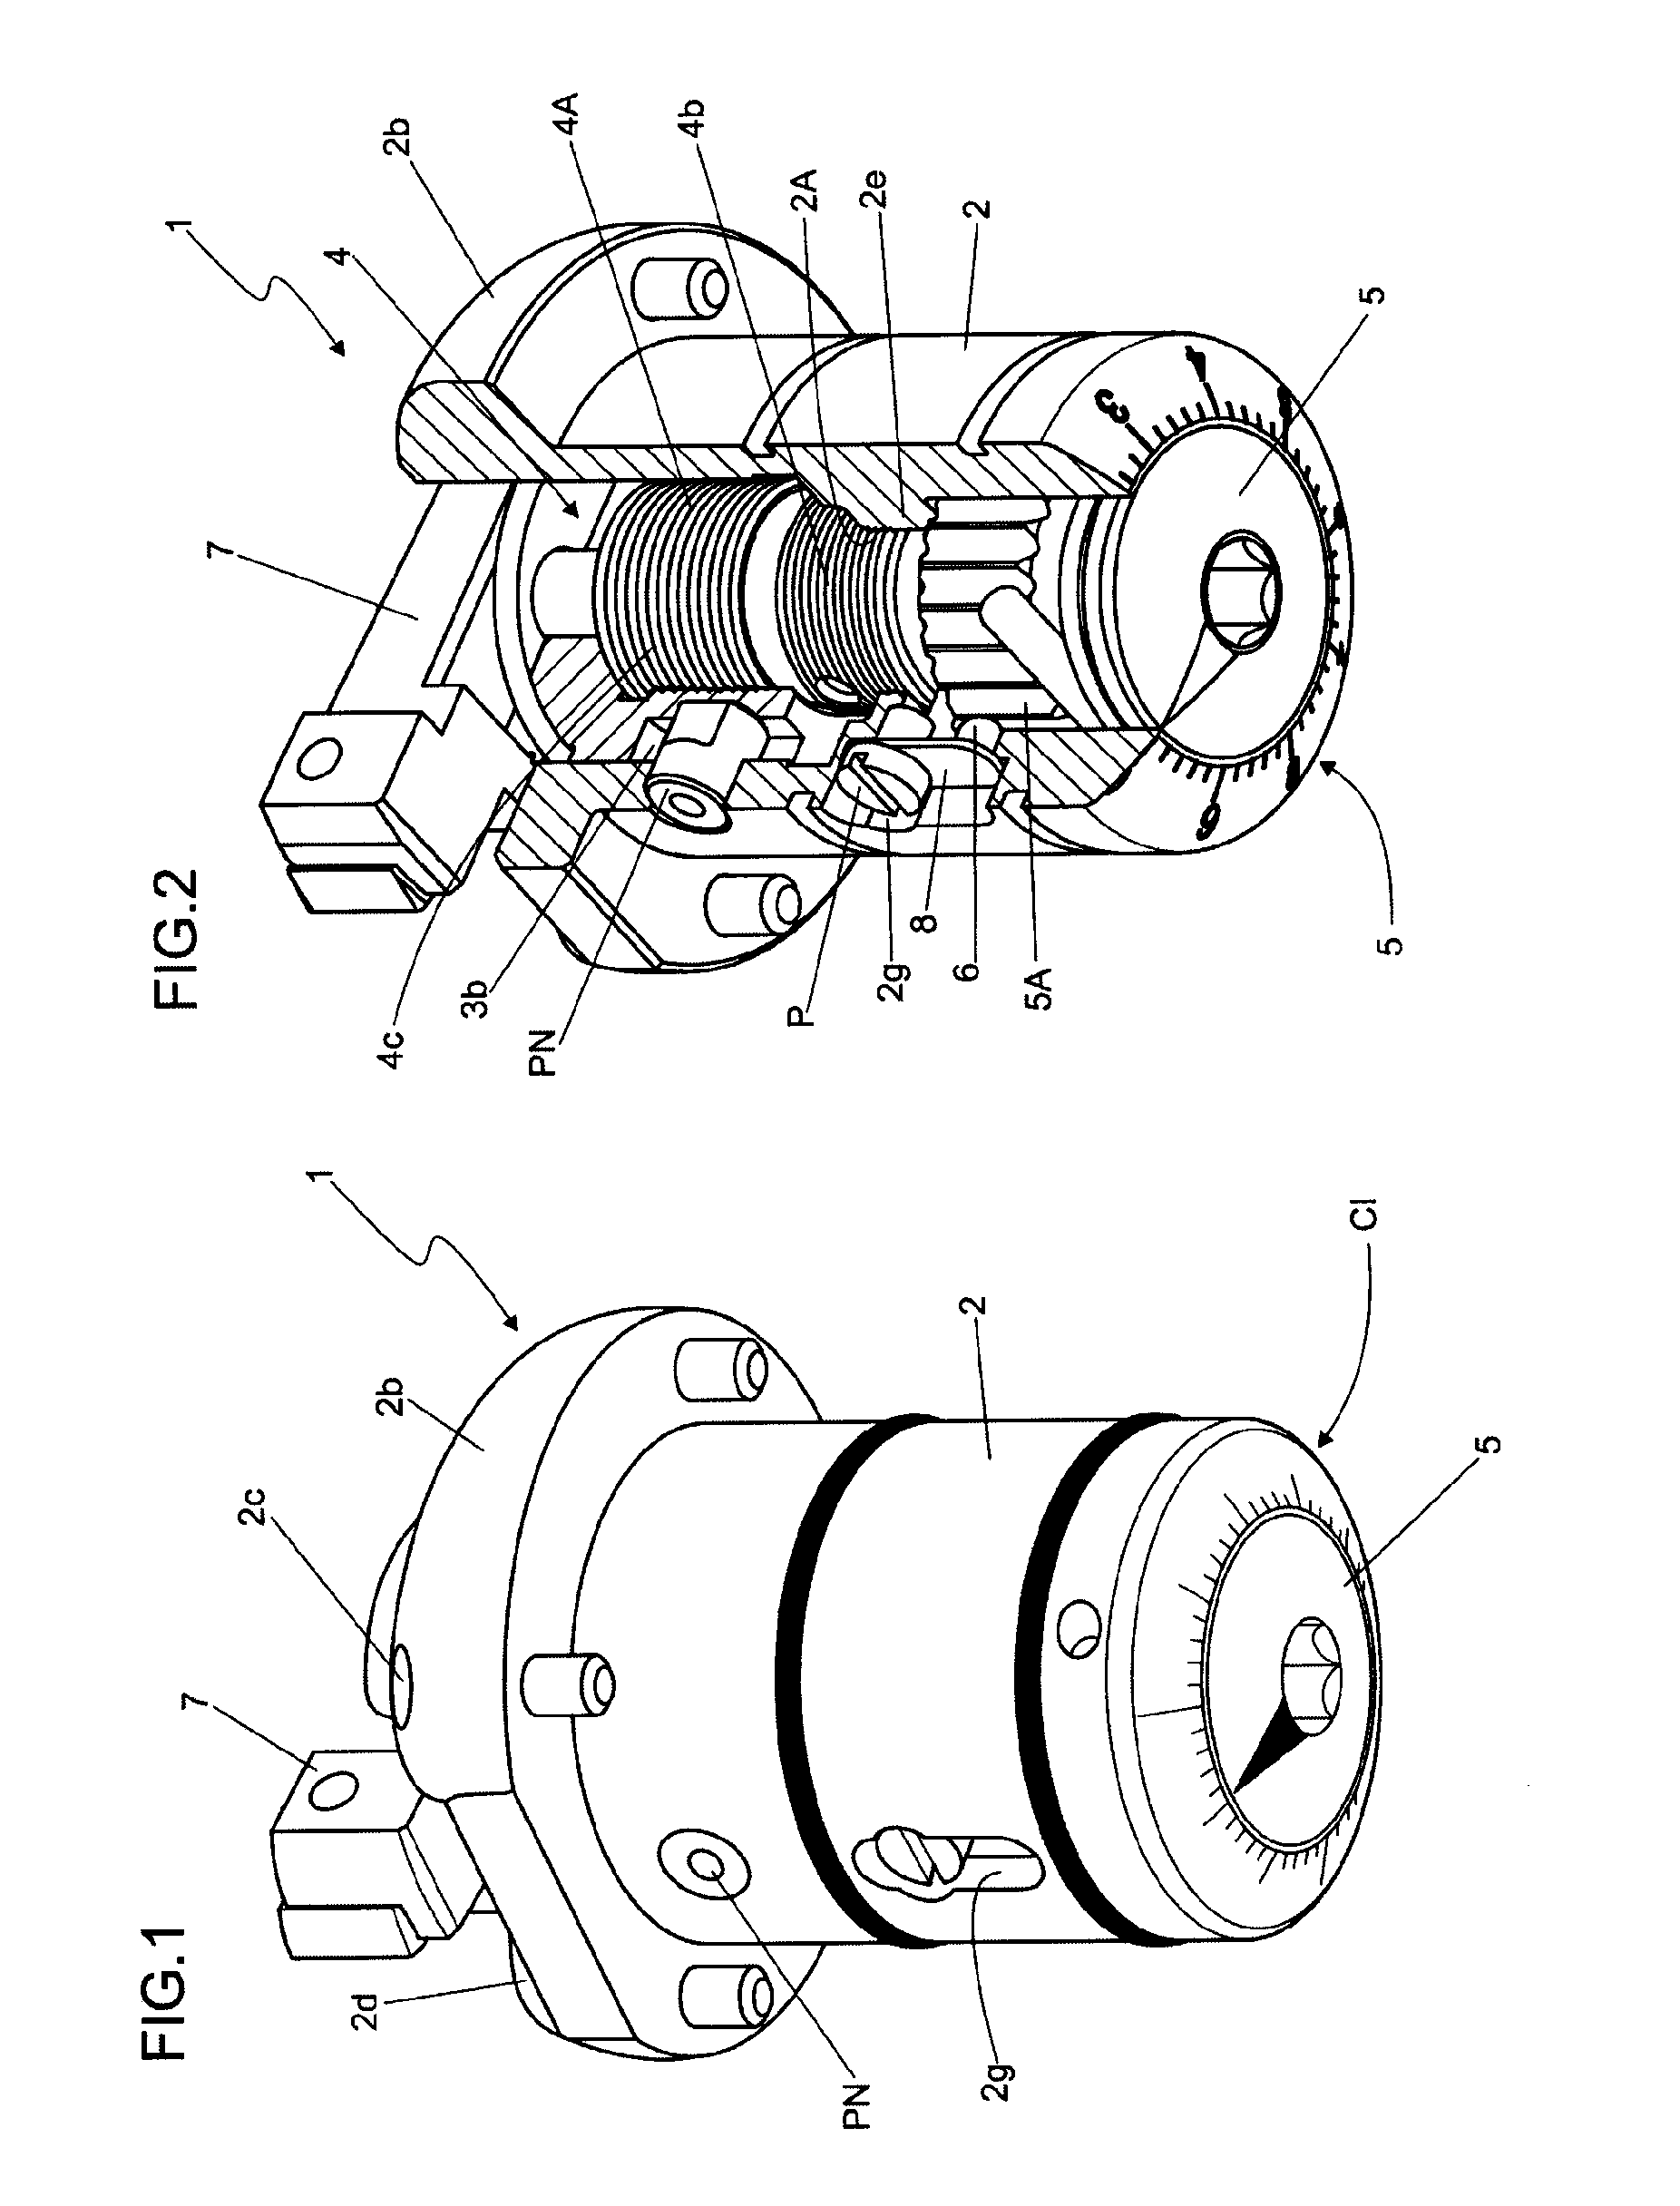 Cartridge with fine-adjustment positioning click used on a boring bar